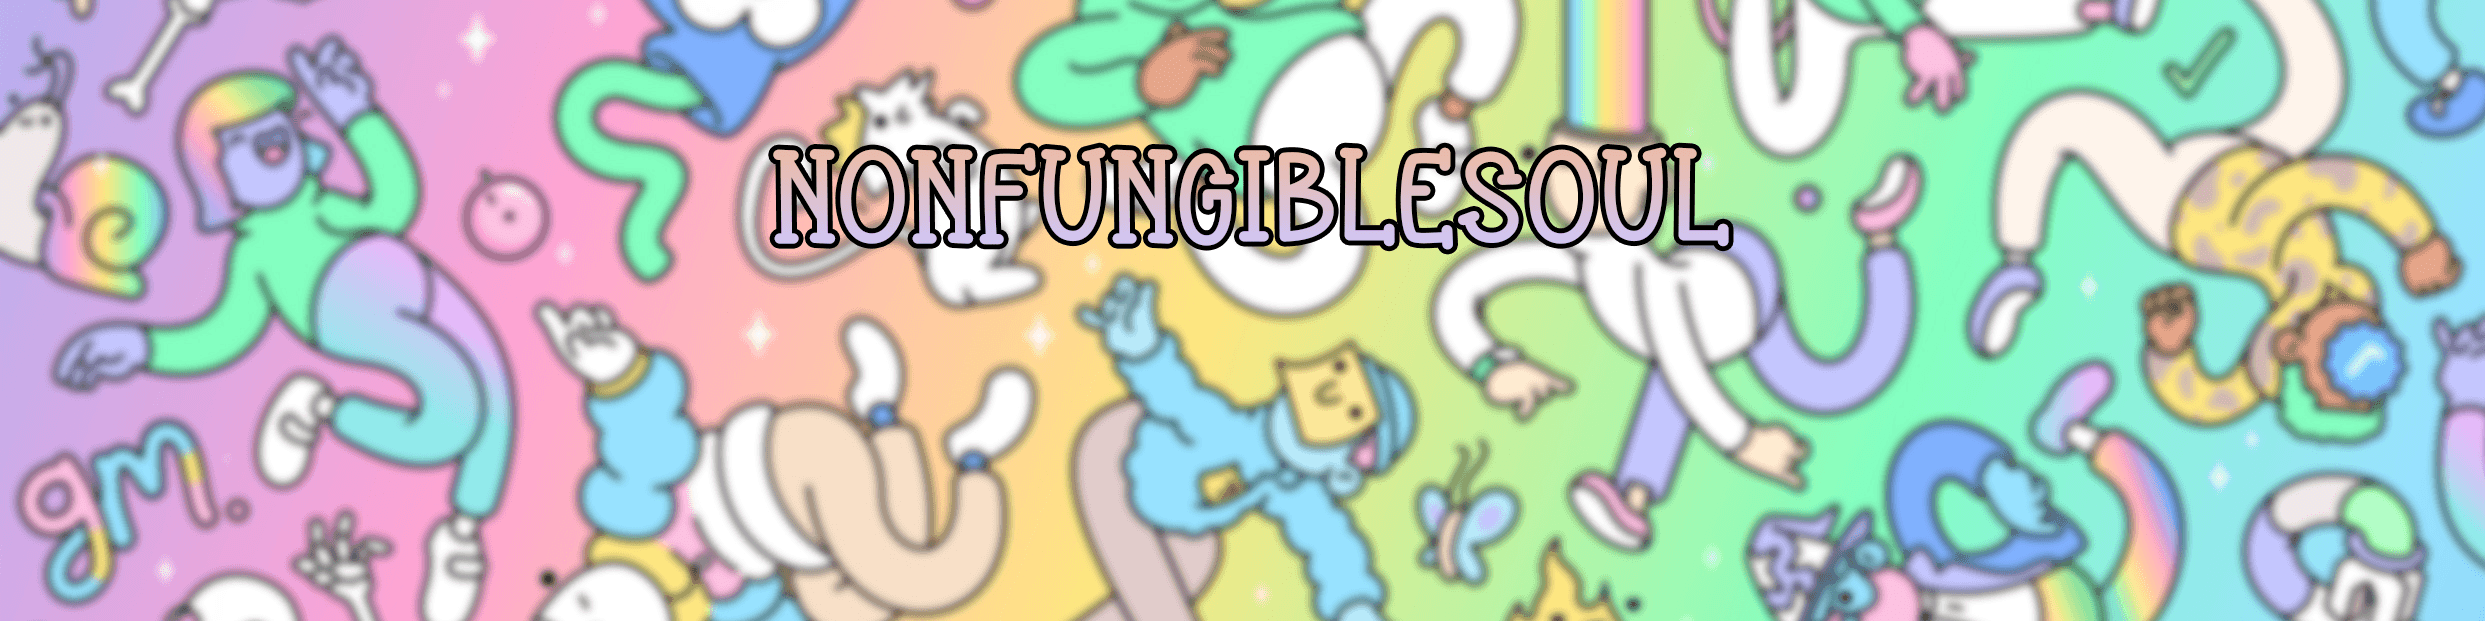 NonFungibleSoul 배너